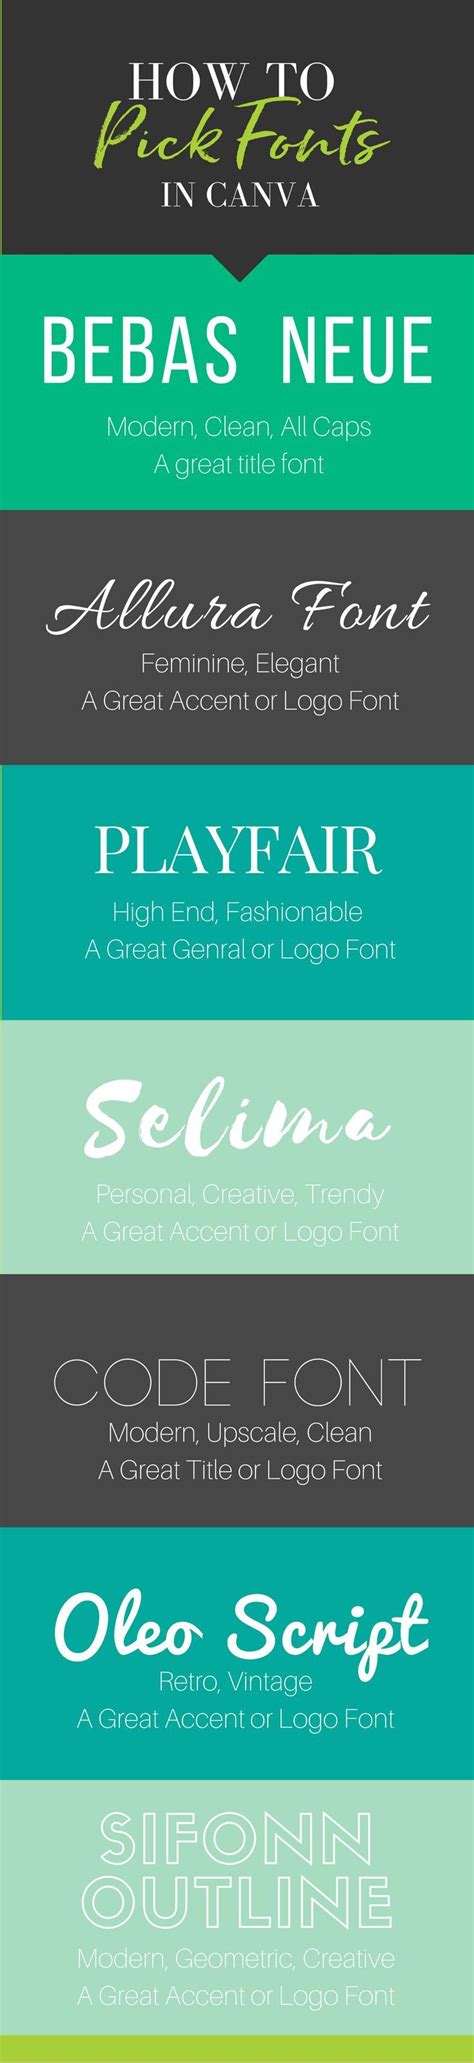 The Ultimate Canva Guide To Choosing Fonts For Your Brand Business